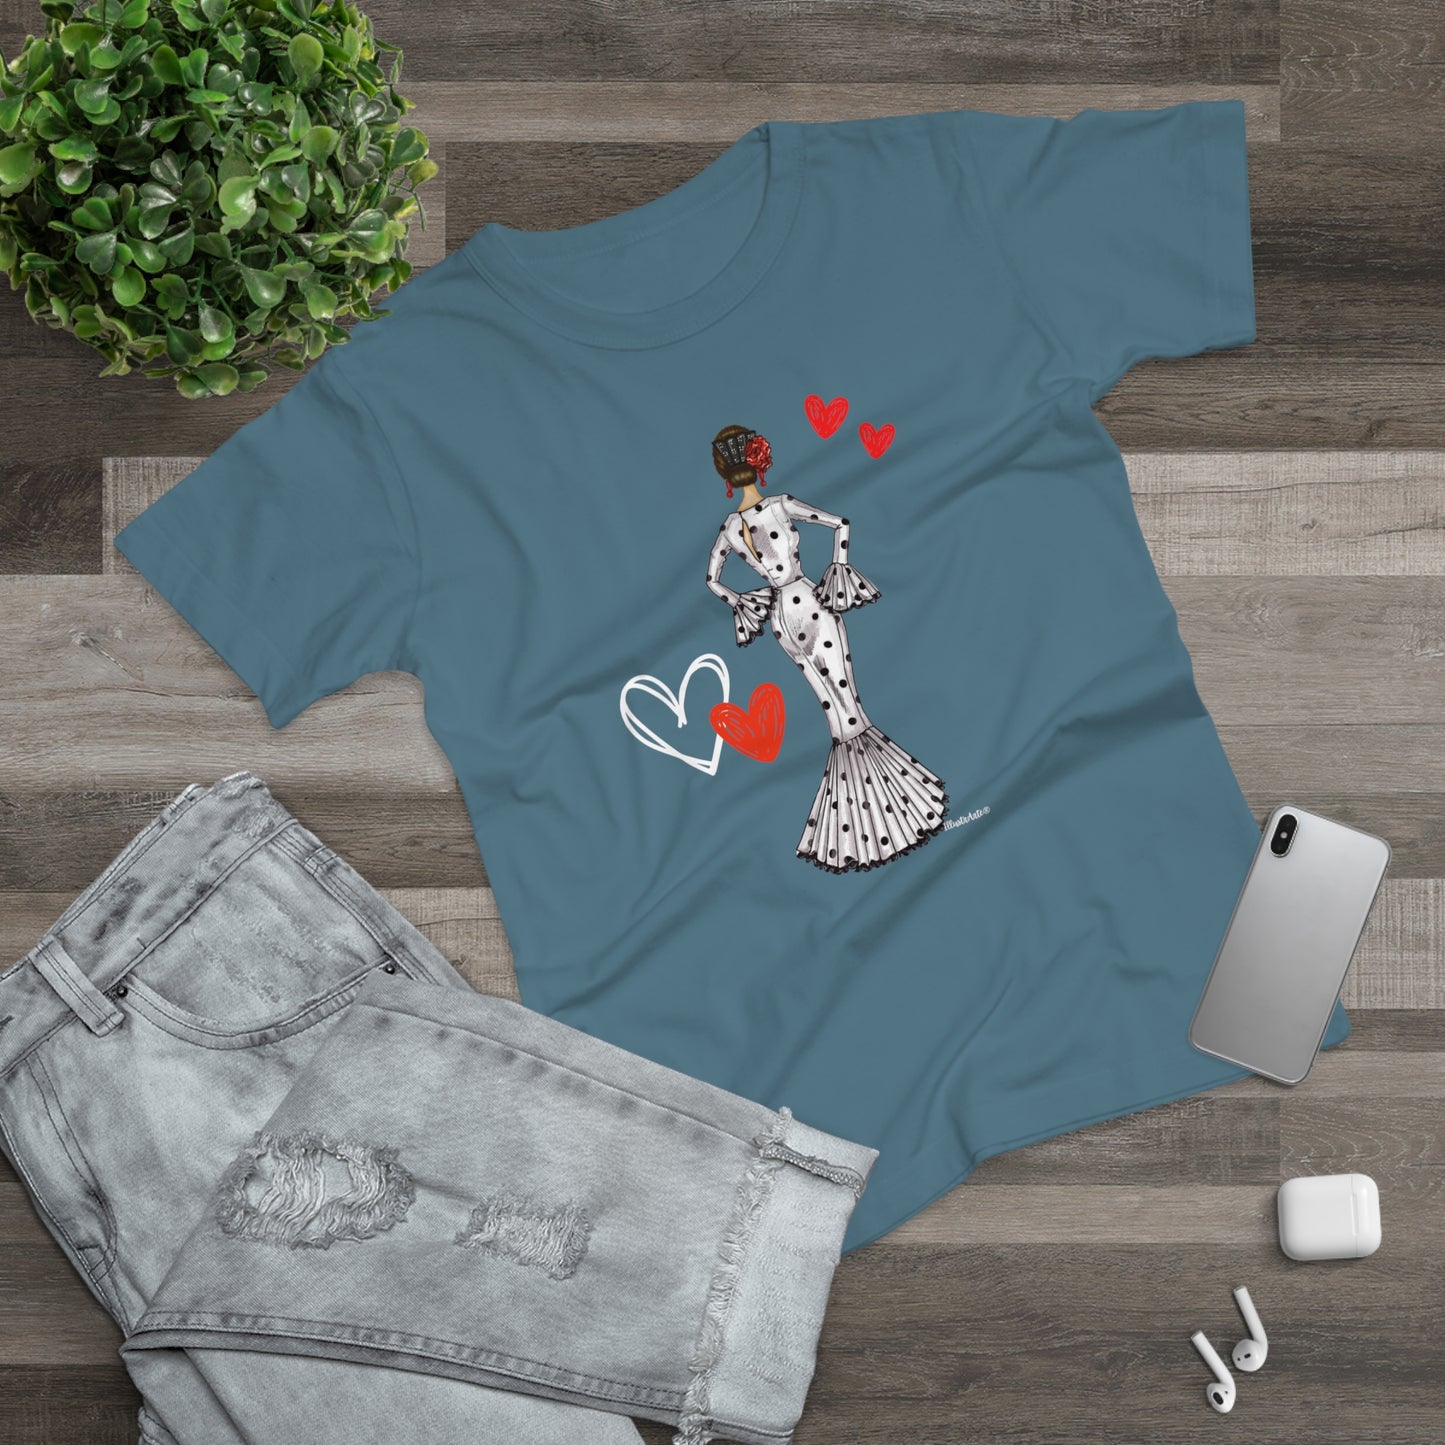 a t - shirt with a picture of a woman with hearts on it